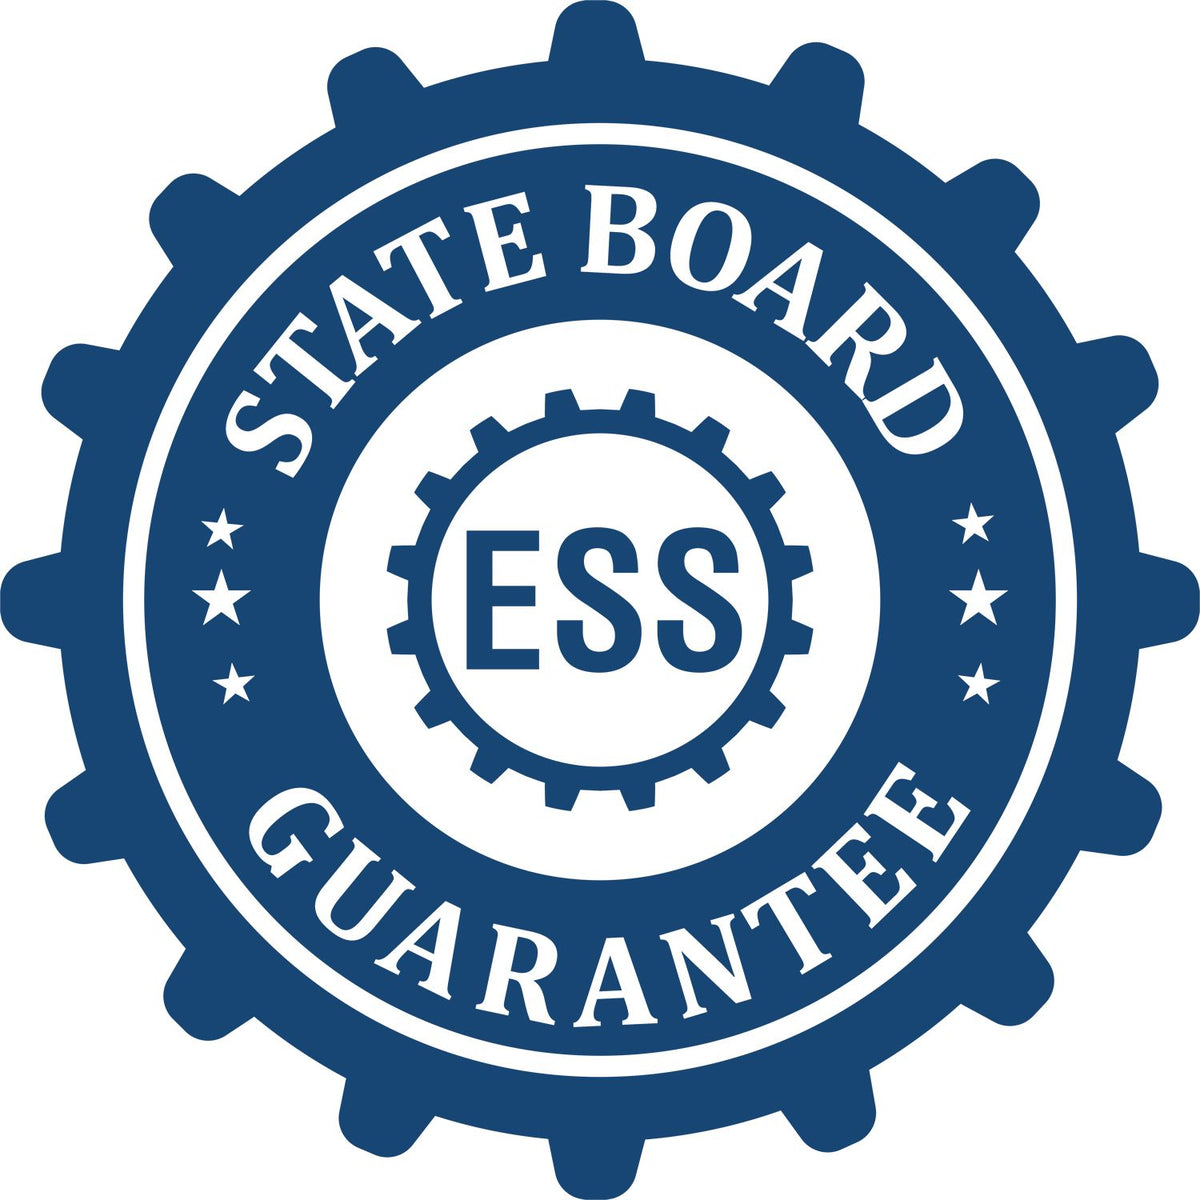 An emblem in a gear shape illustrating a state board guarantee for the MaxLight Premium Pre-Inked Oregon Rectangular Notarial Stamp product.